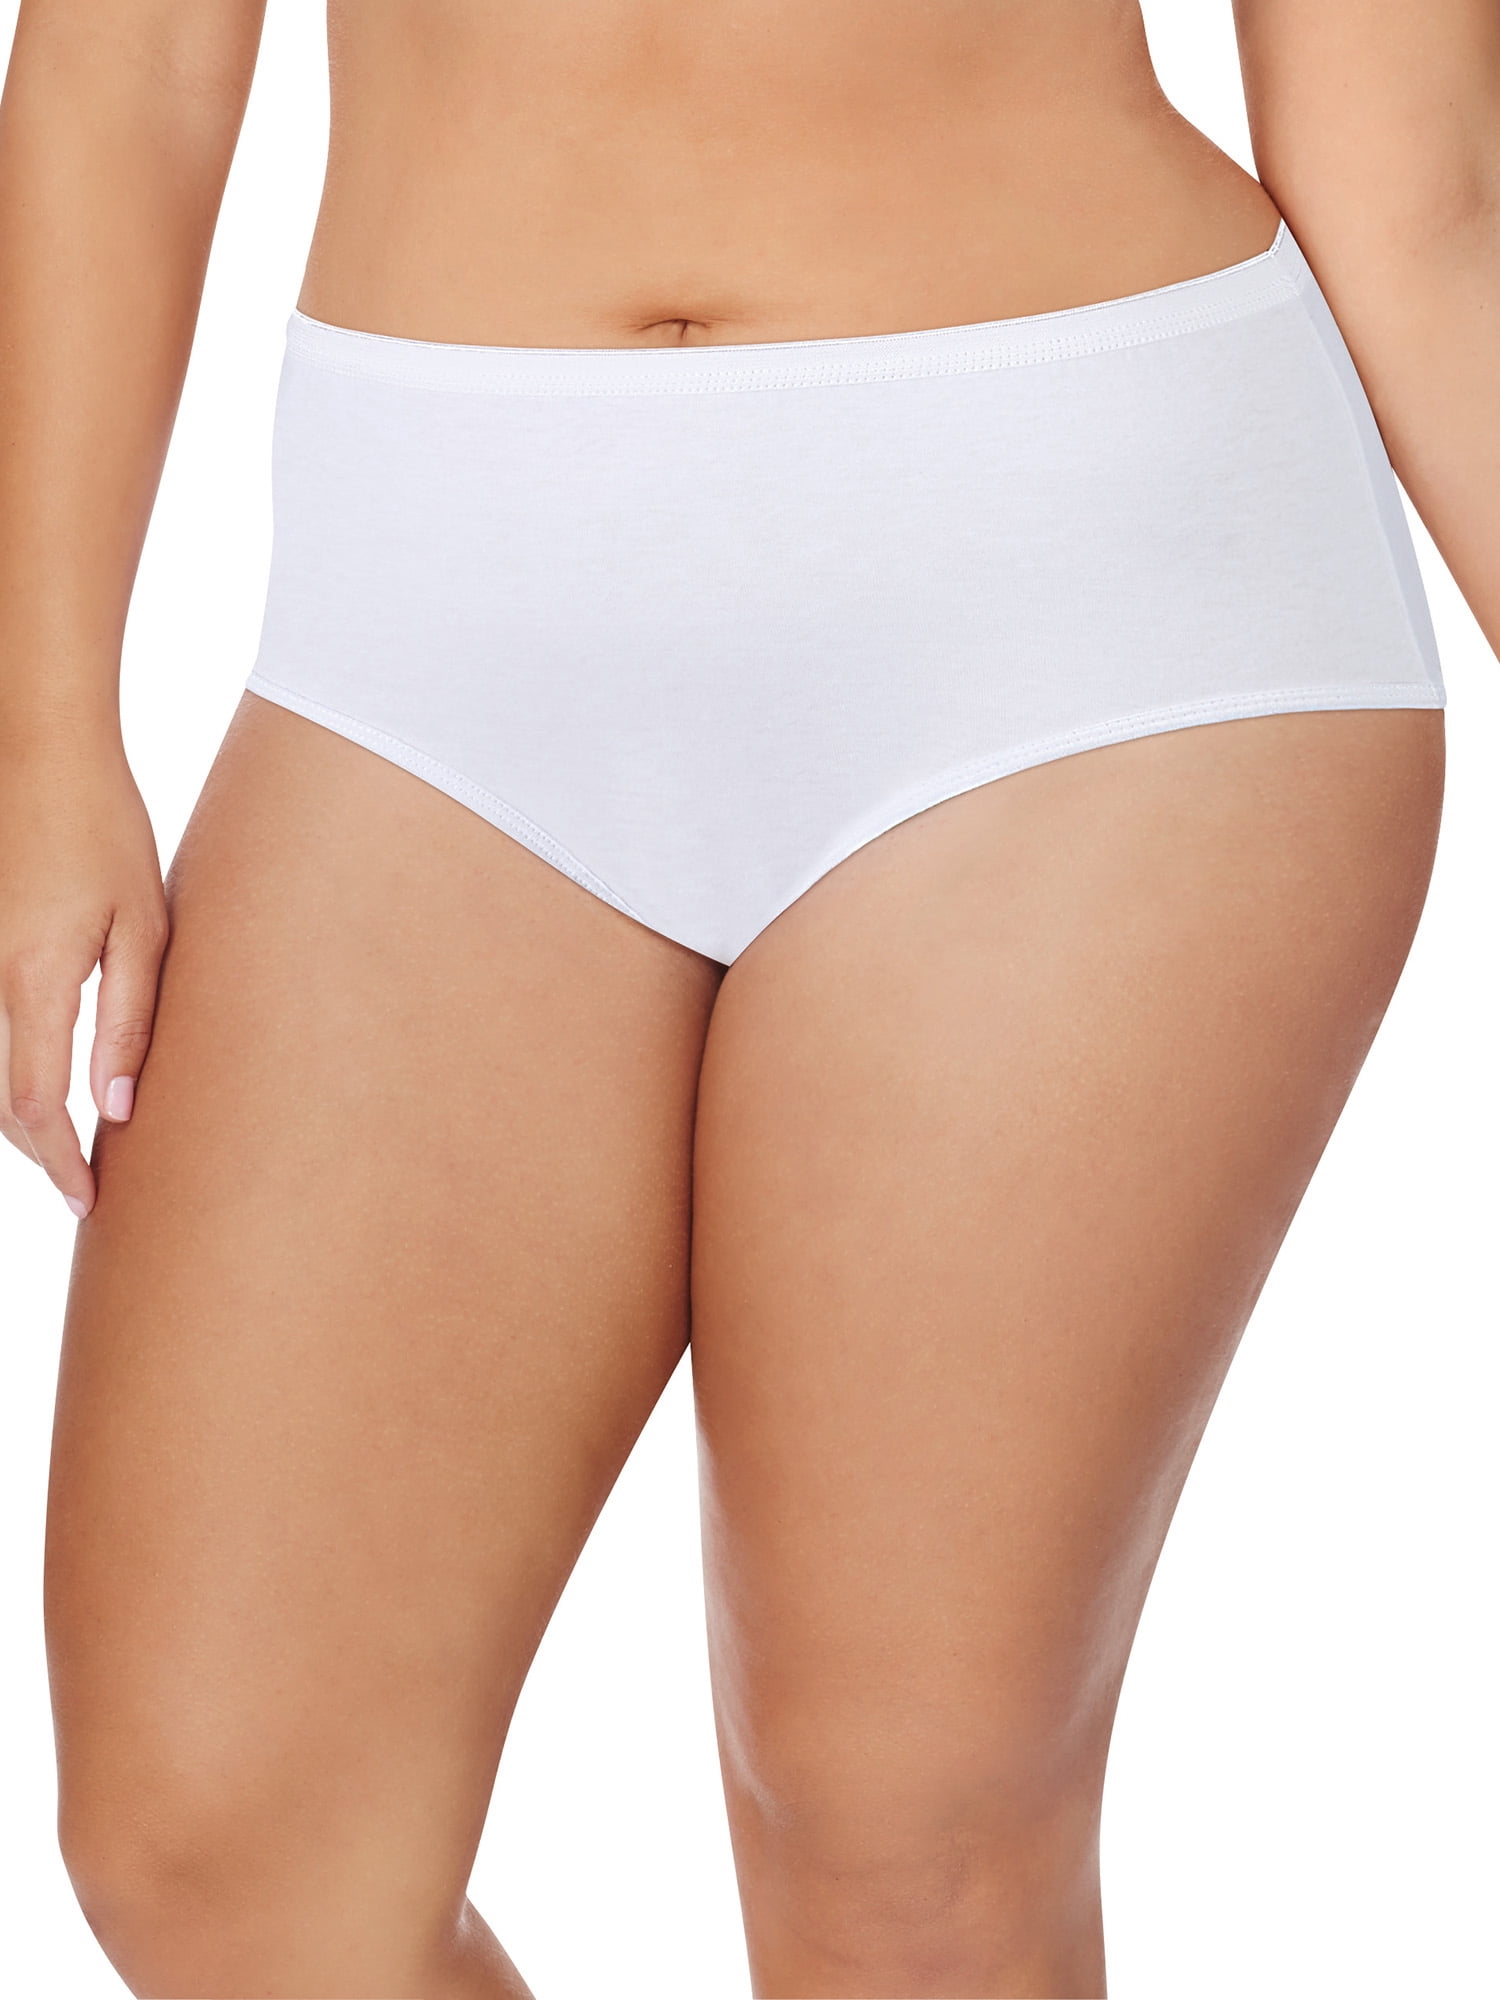 Just My Size Women's Plus Tagless White Cotton Briefs 5-Pack